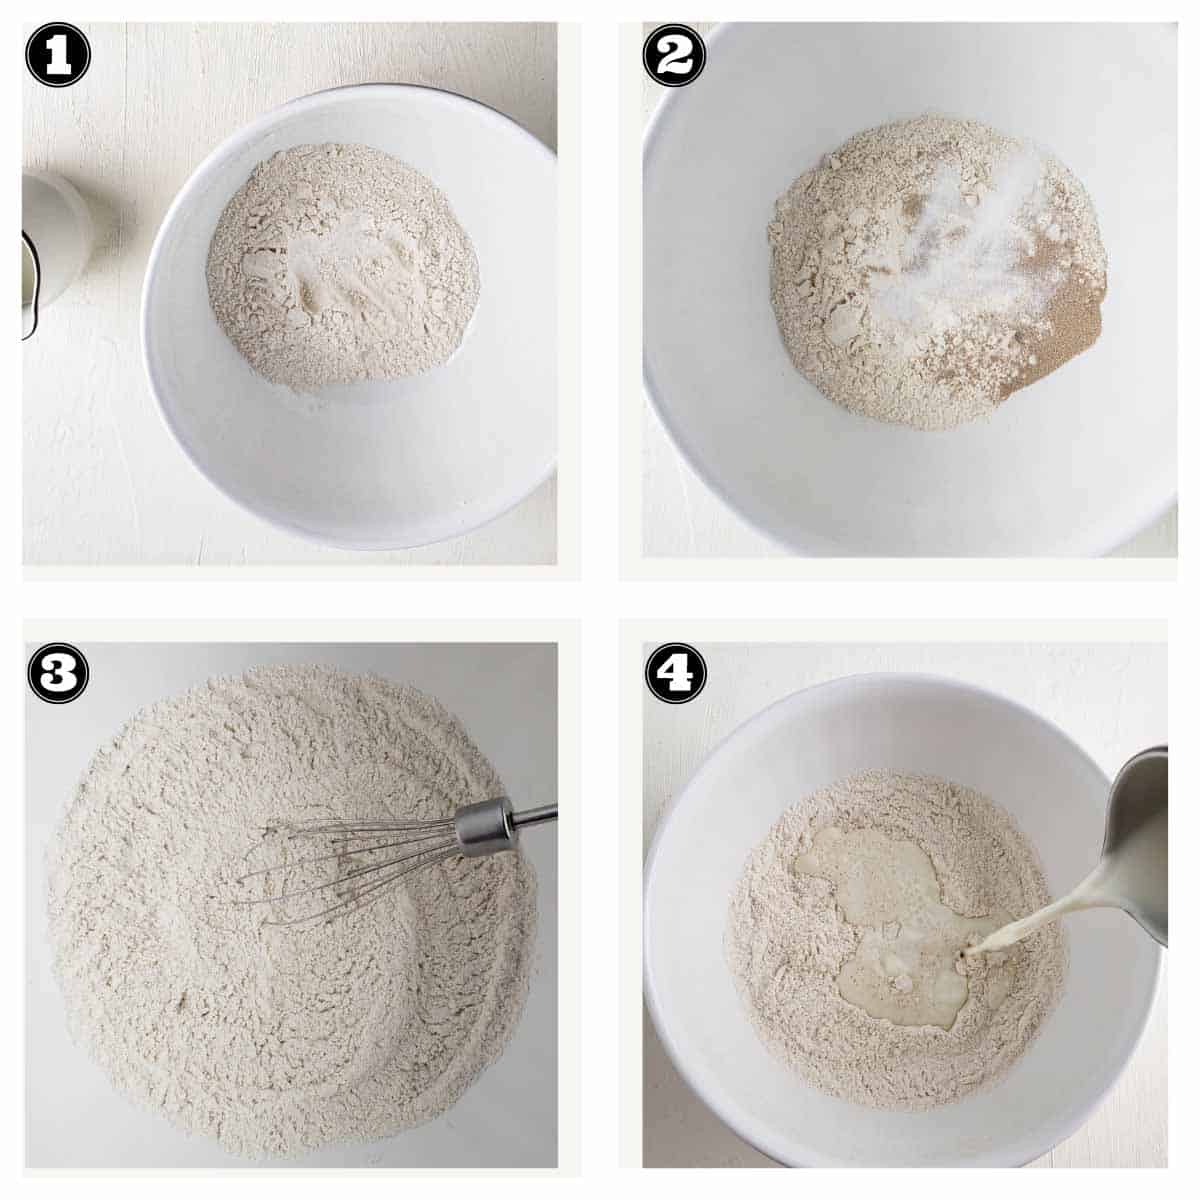 step by step images showing combining dry nad wet ingredients